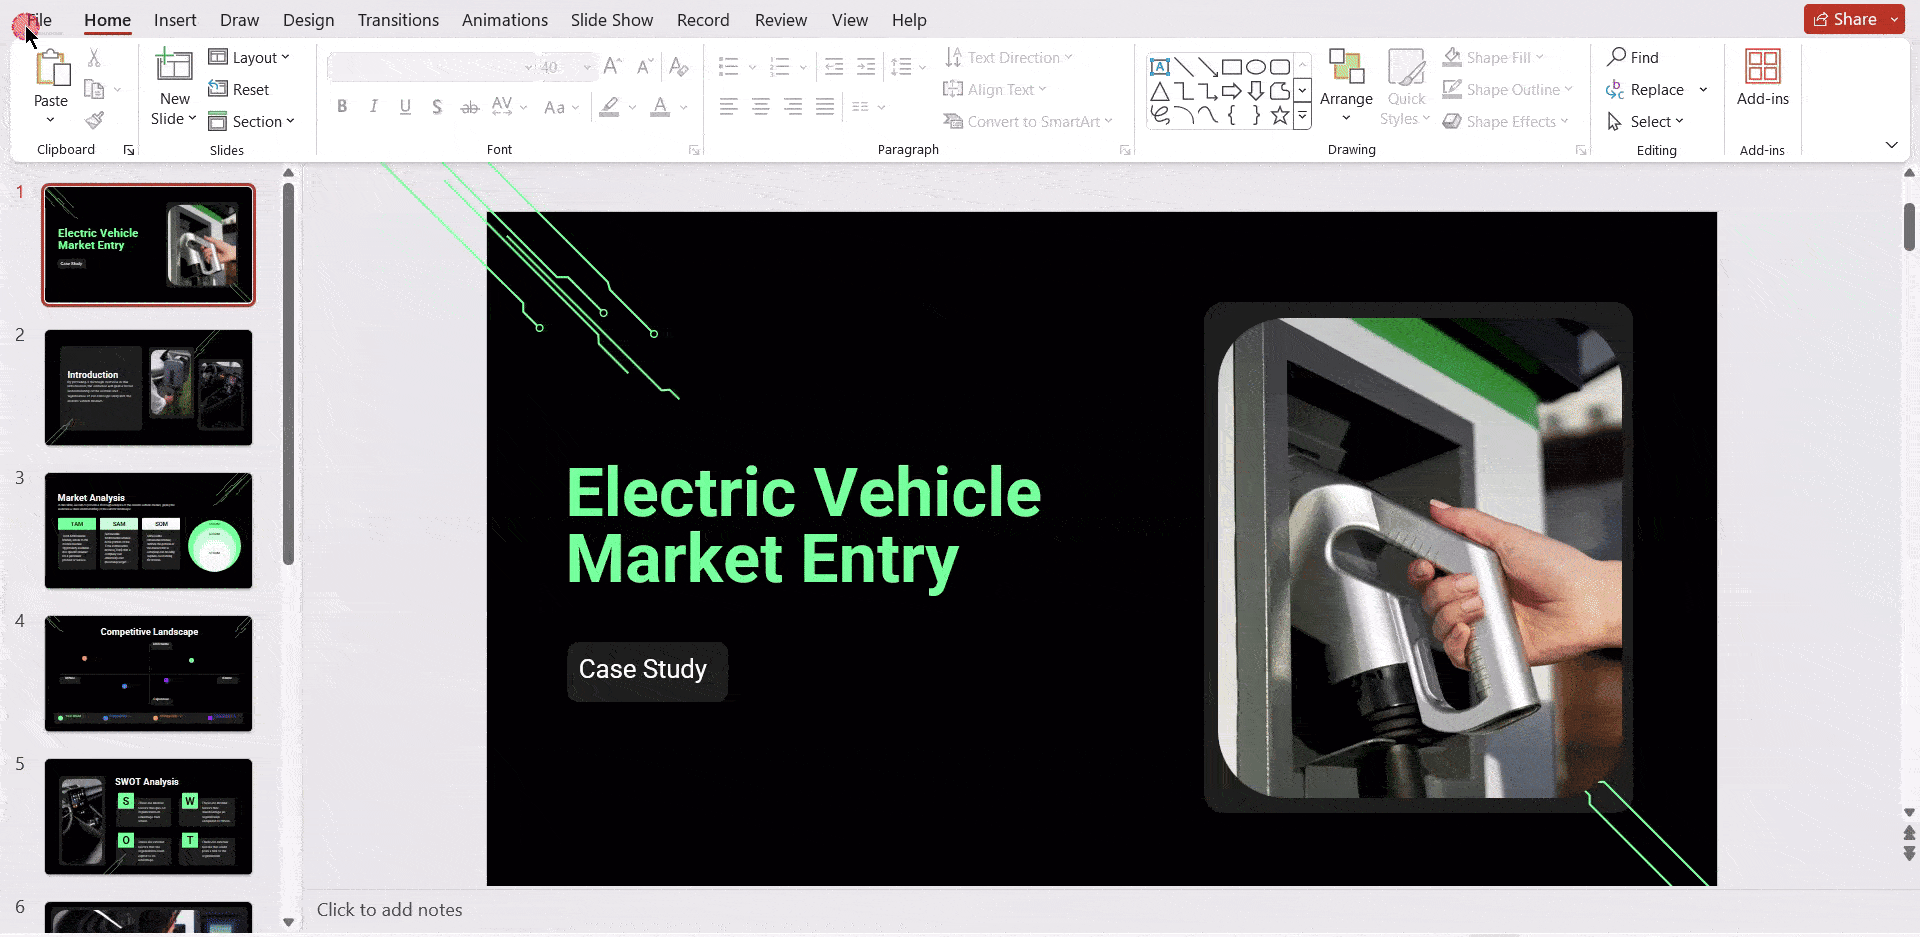 Method 3 Using Print to PDF (For Presentations with speaker notes)